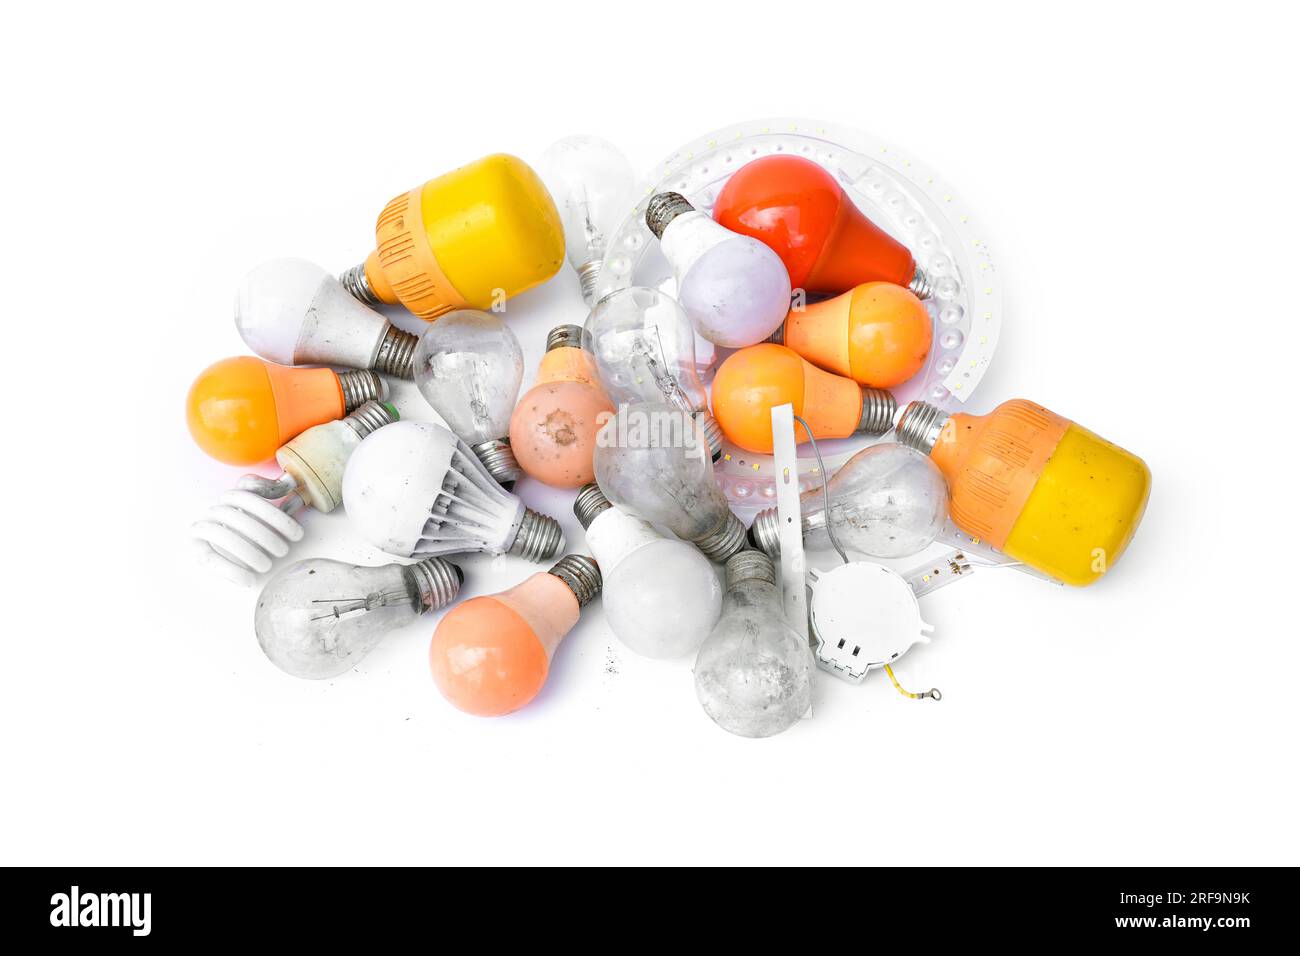 Pile of garbage Used and disposed of light incandescent bulb and energy saving lamps (LED) expired from use isolated on white background. Stock Photo